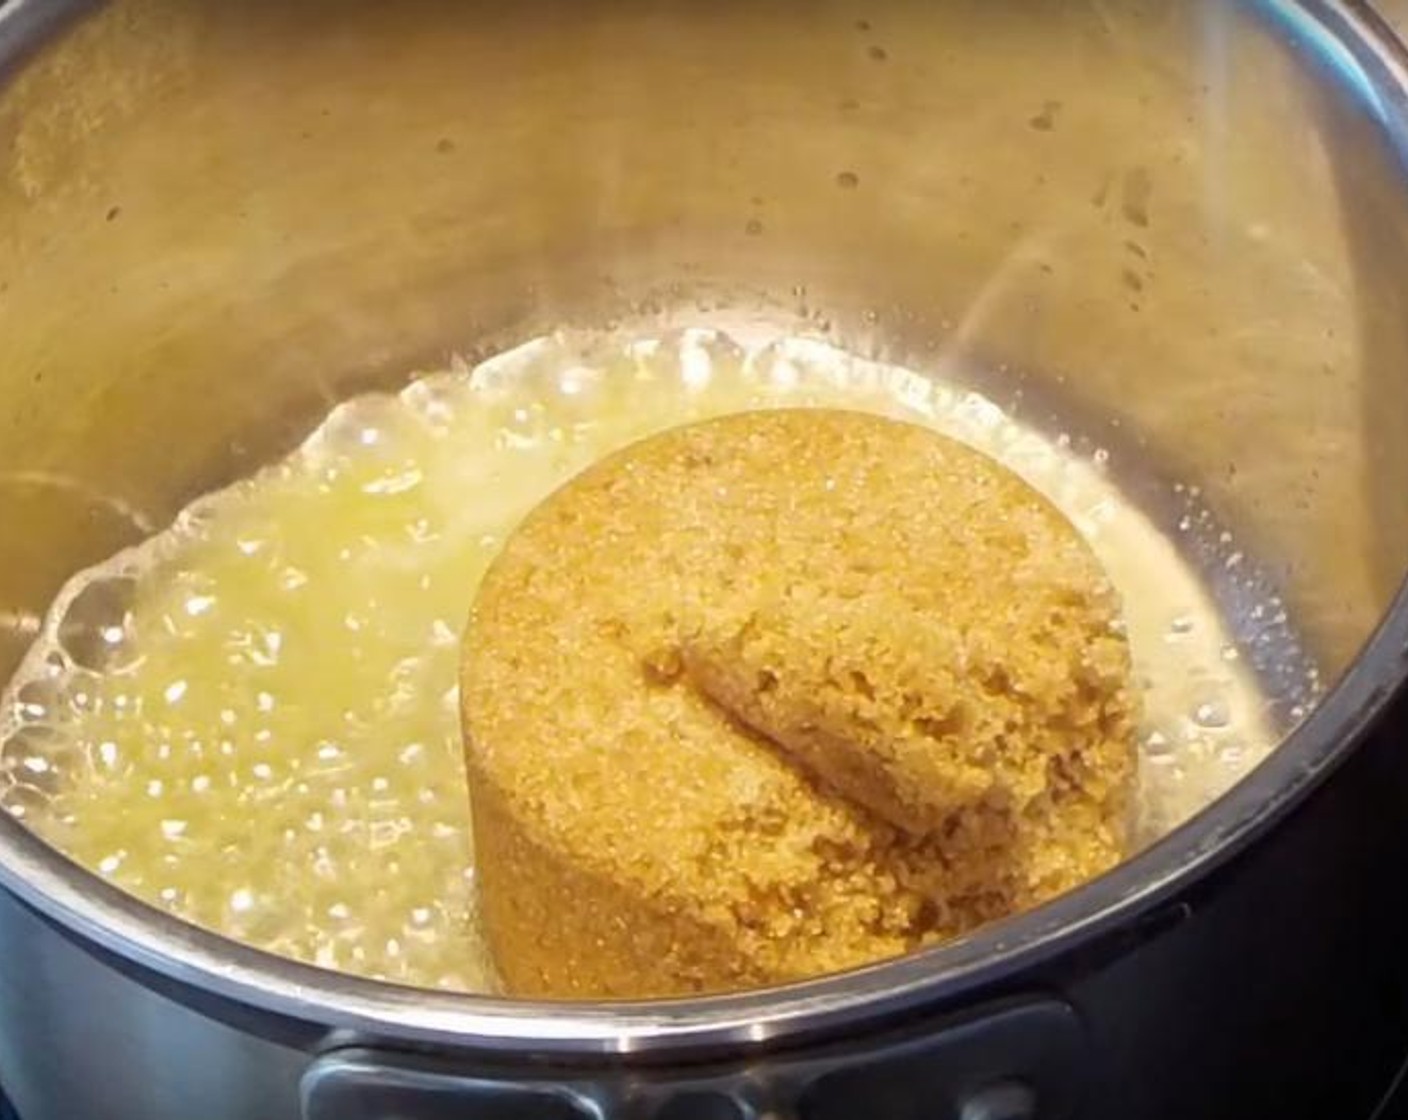 step 1 Melt Salted Butter (3 Tbsp) in a pot, and add Brown Sugar (1 cup) and keep stirring them together until completely melted. Give the mix a whisk and remove it from the heat. Mix in Heavy Cream (1/2 cup) and Vanilla Extract (1 tsp).